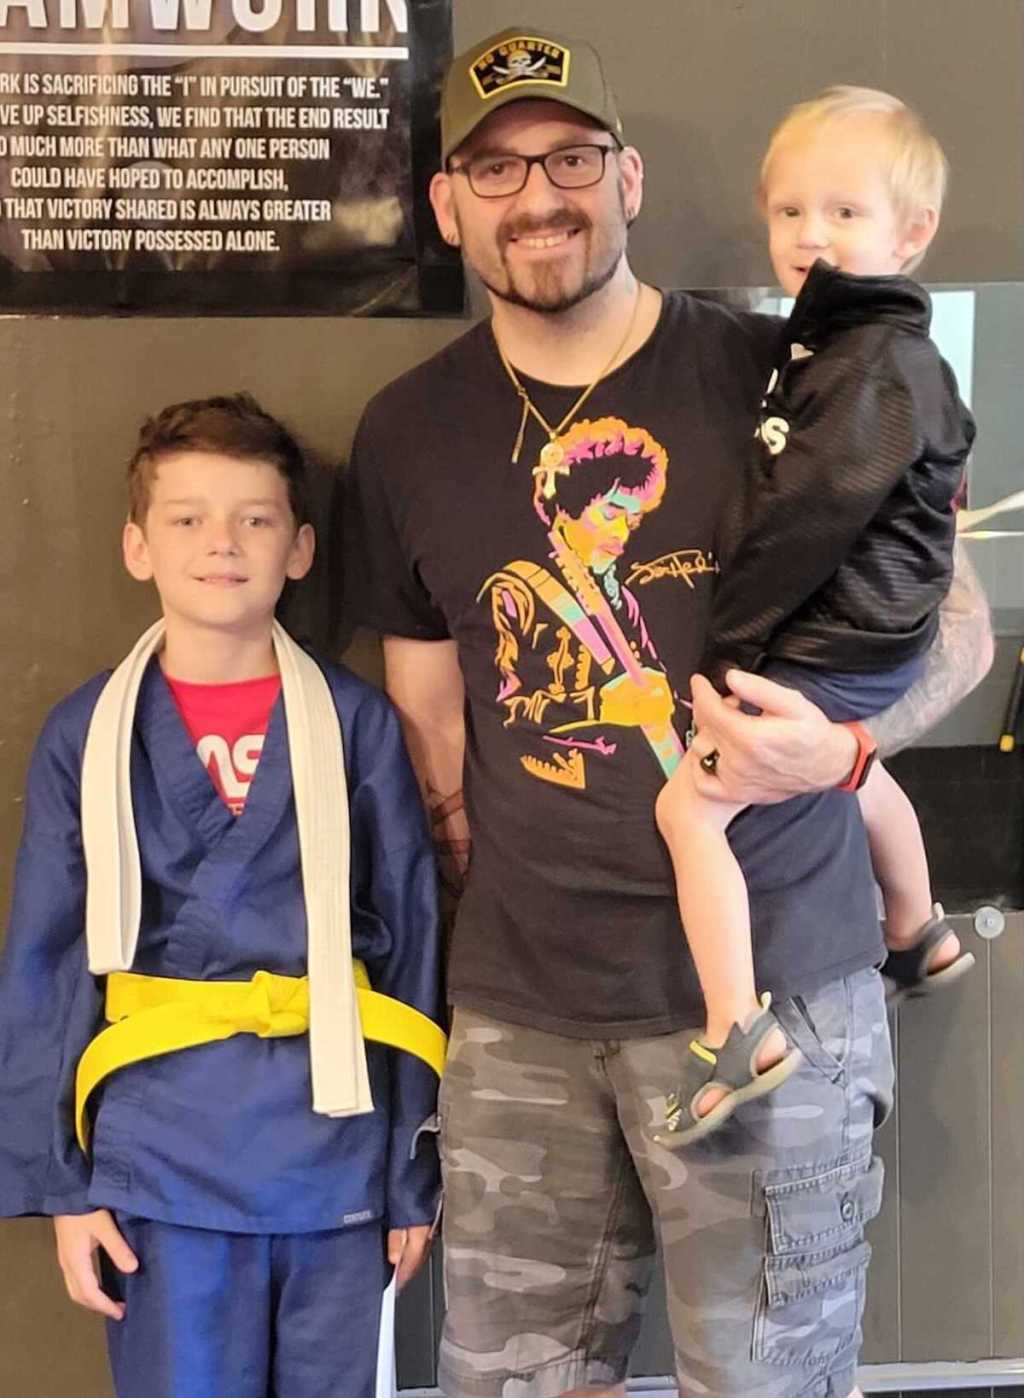 boy wearing Tae Kwon Do yellow belt standing with dad and baby brother